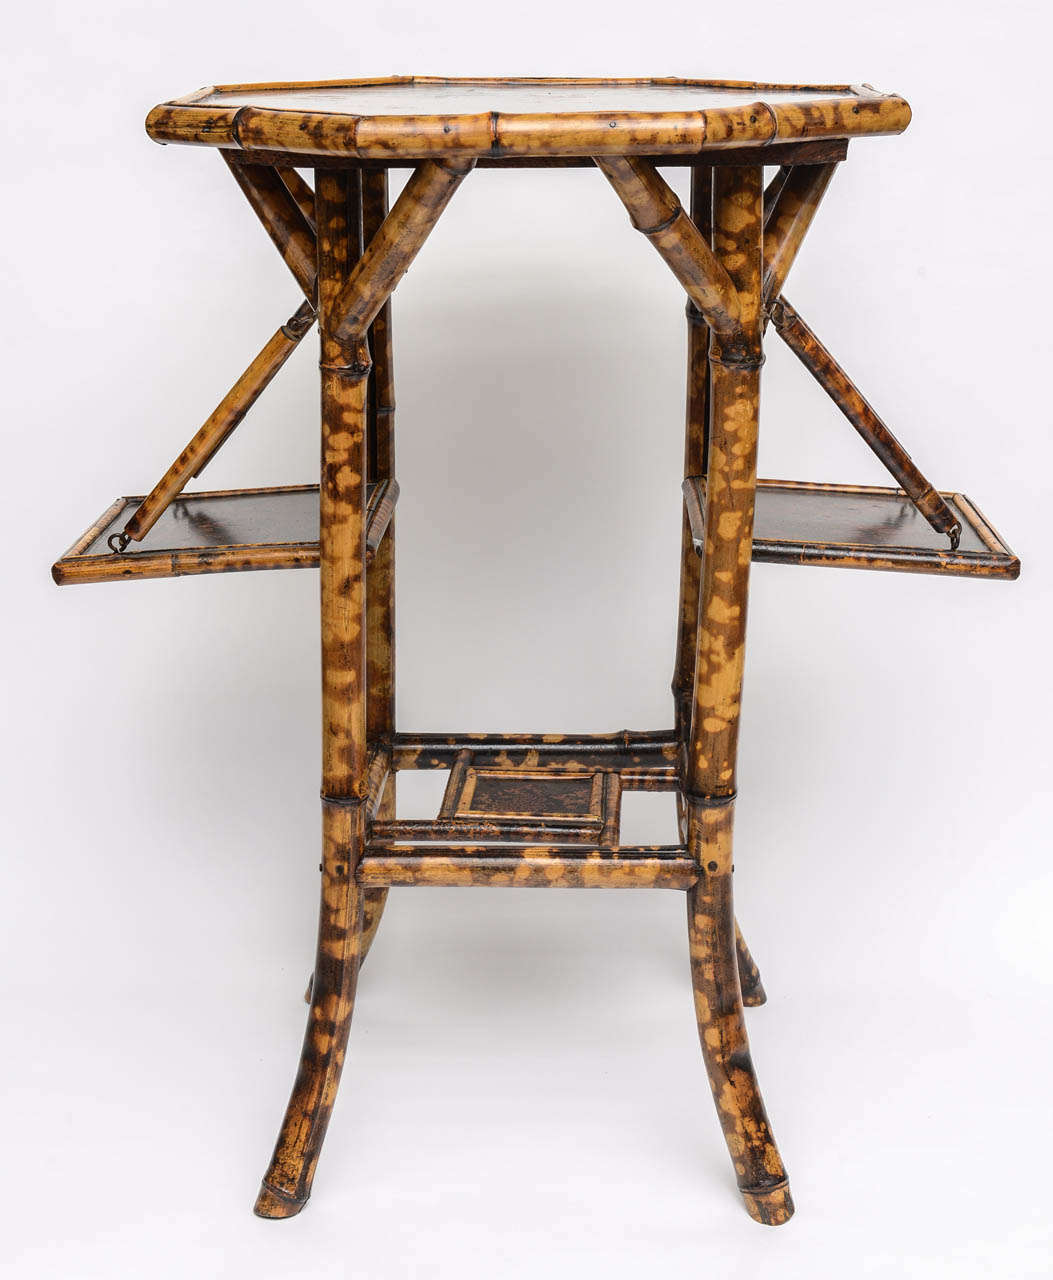 British 19th Century English Bamboo Octagonal Table with Extending Side Panels